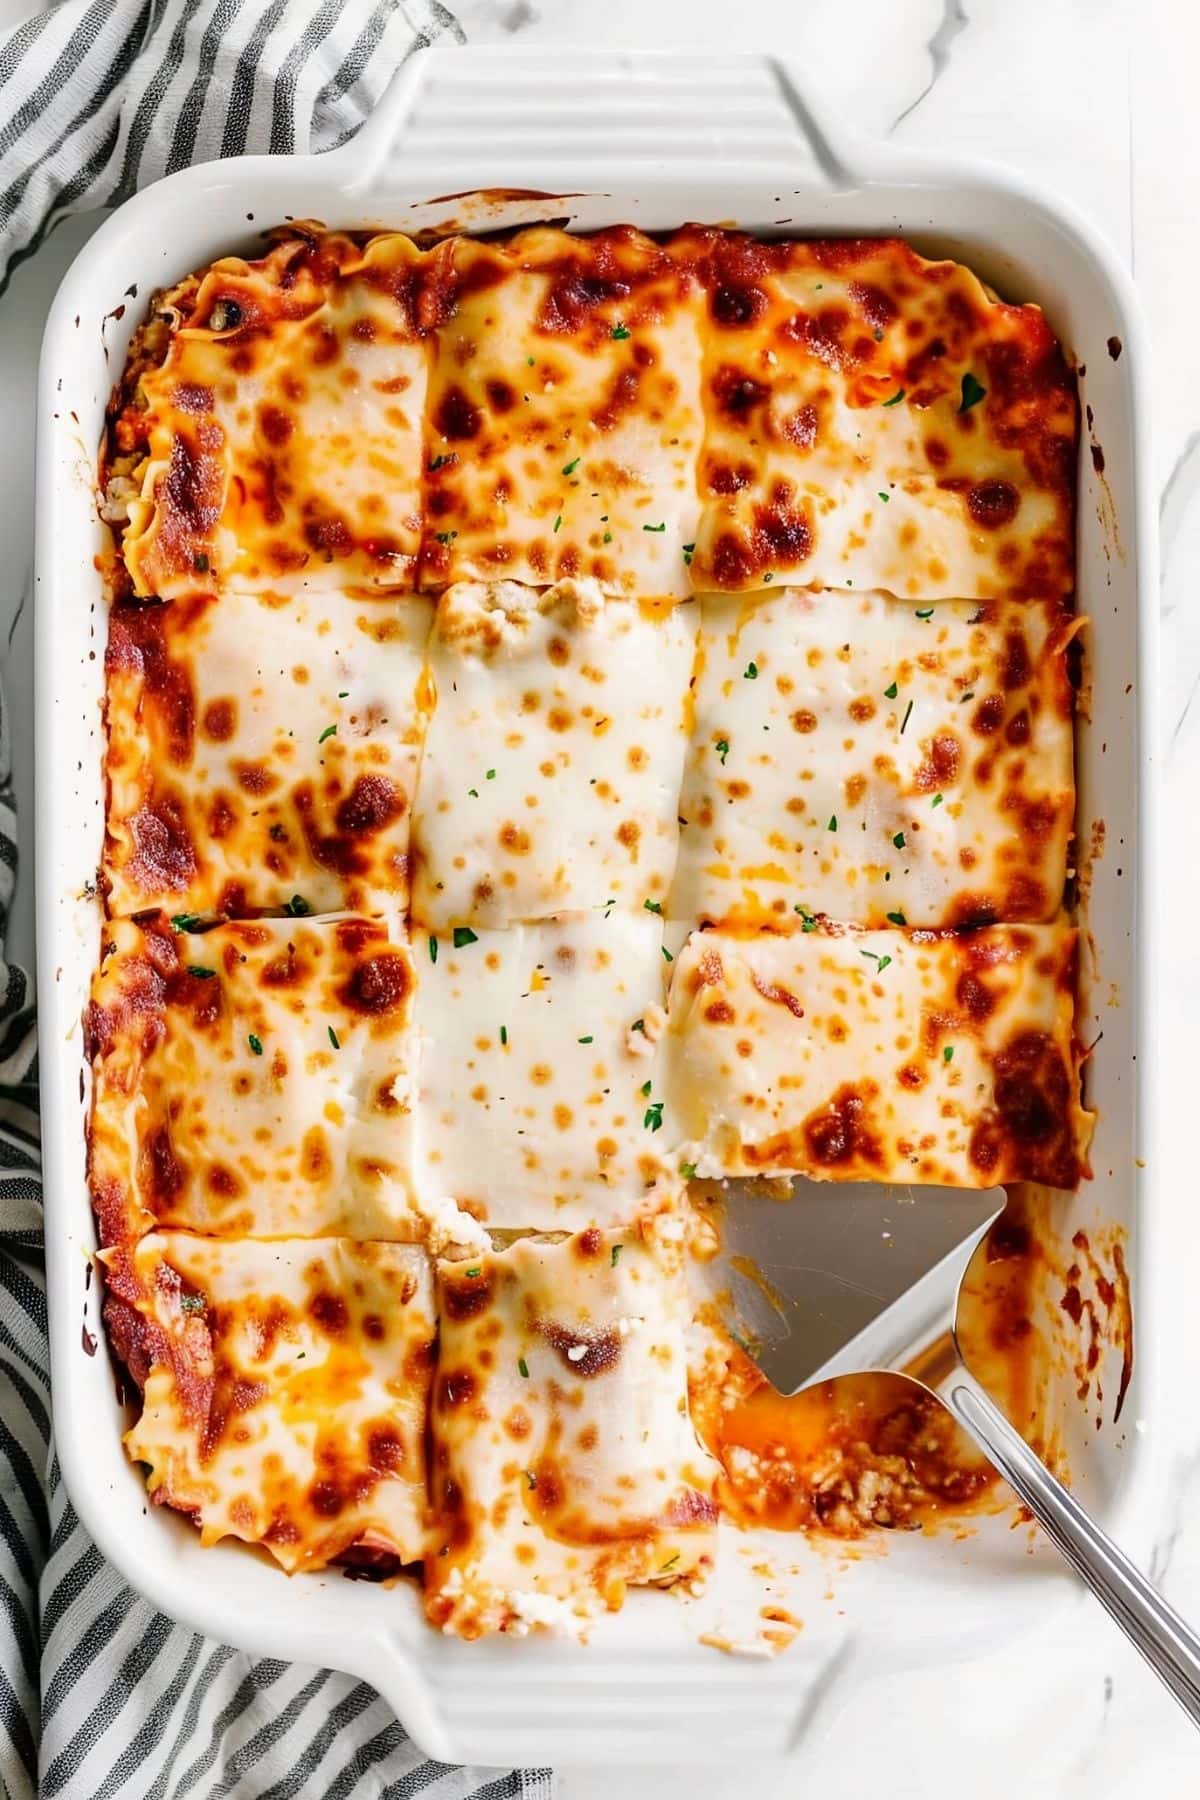 Top View of Cottage Cheese Lasagna in a Casserole Dish with a Spatula